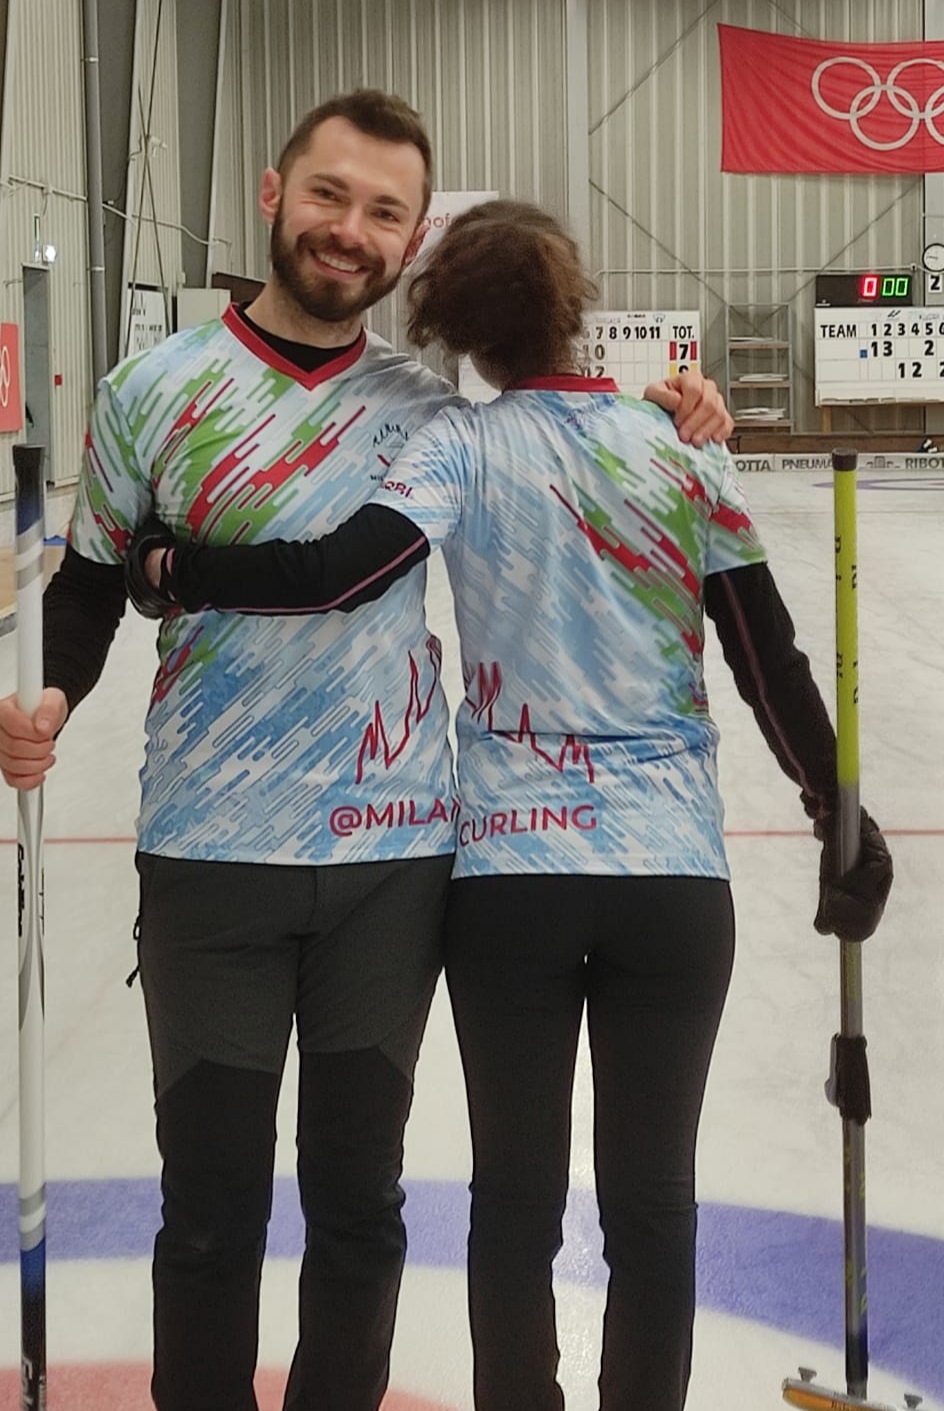 Mixed Doubles Championship 2021-22